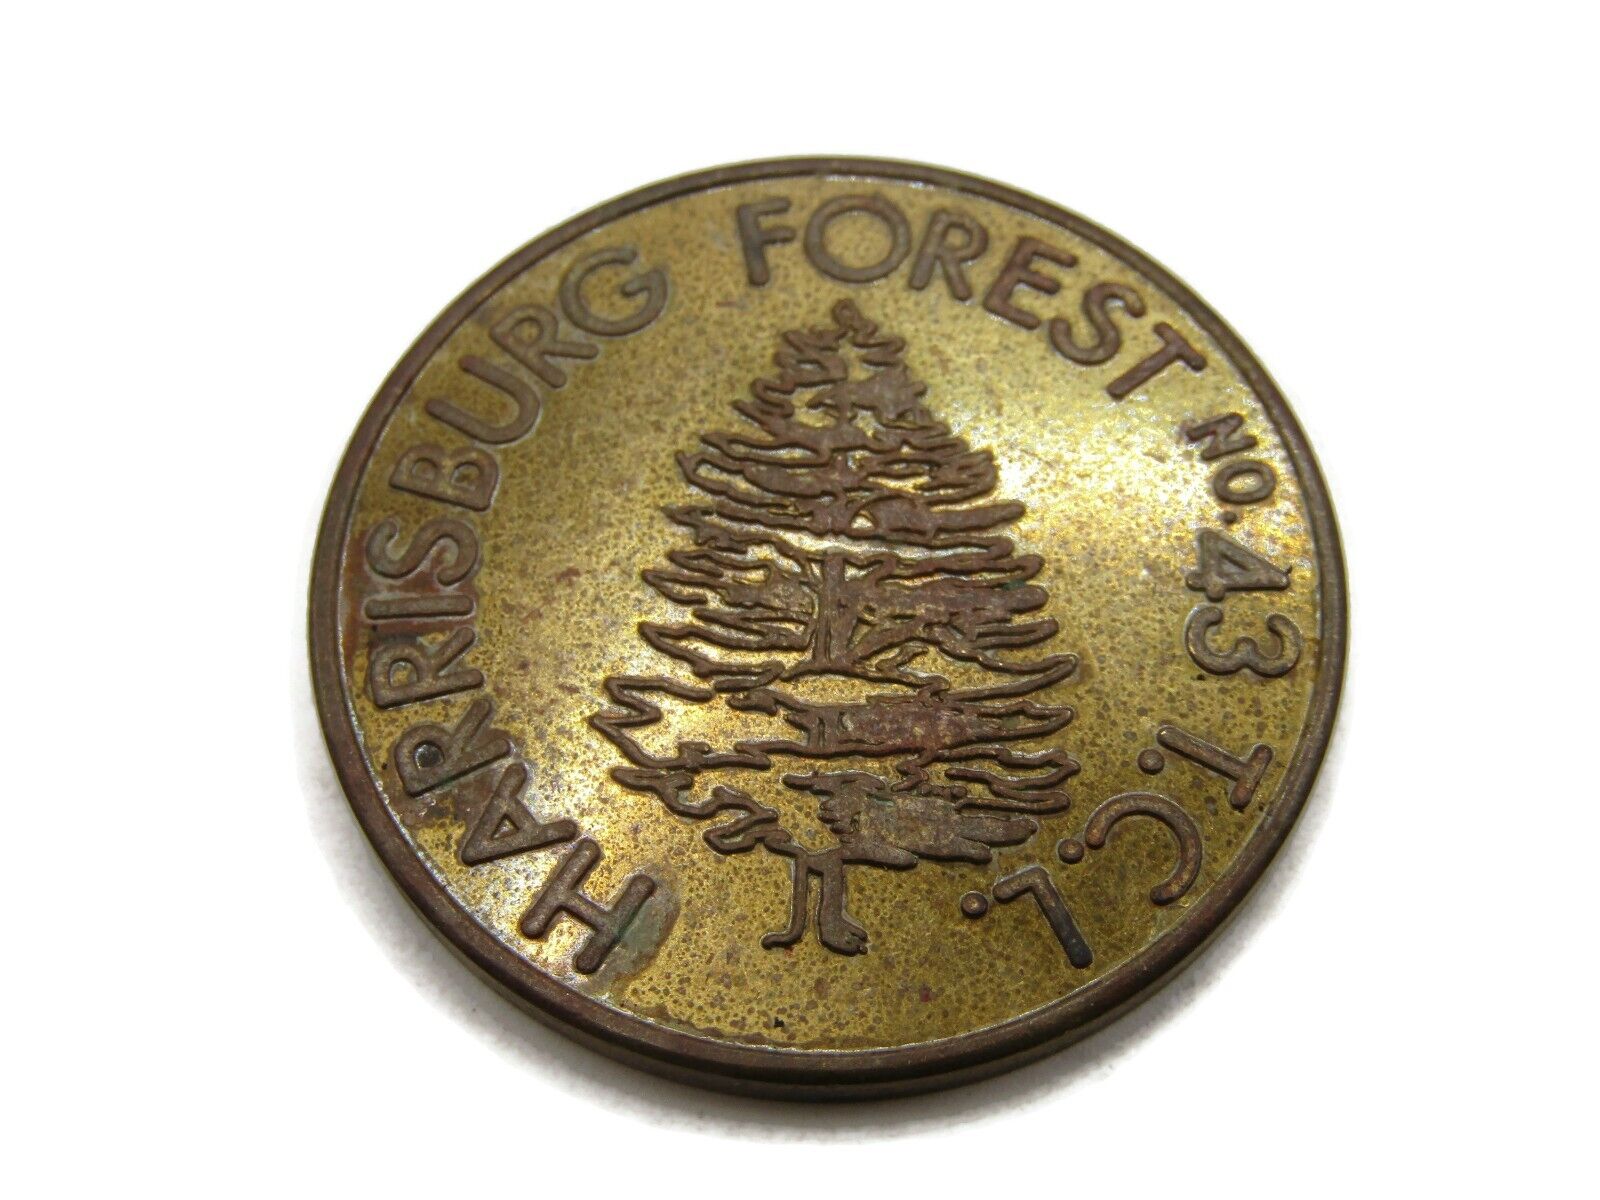 Harrisburg Forest TCL No 43 Coin 50th Anniversary